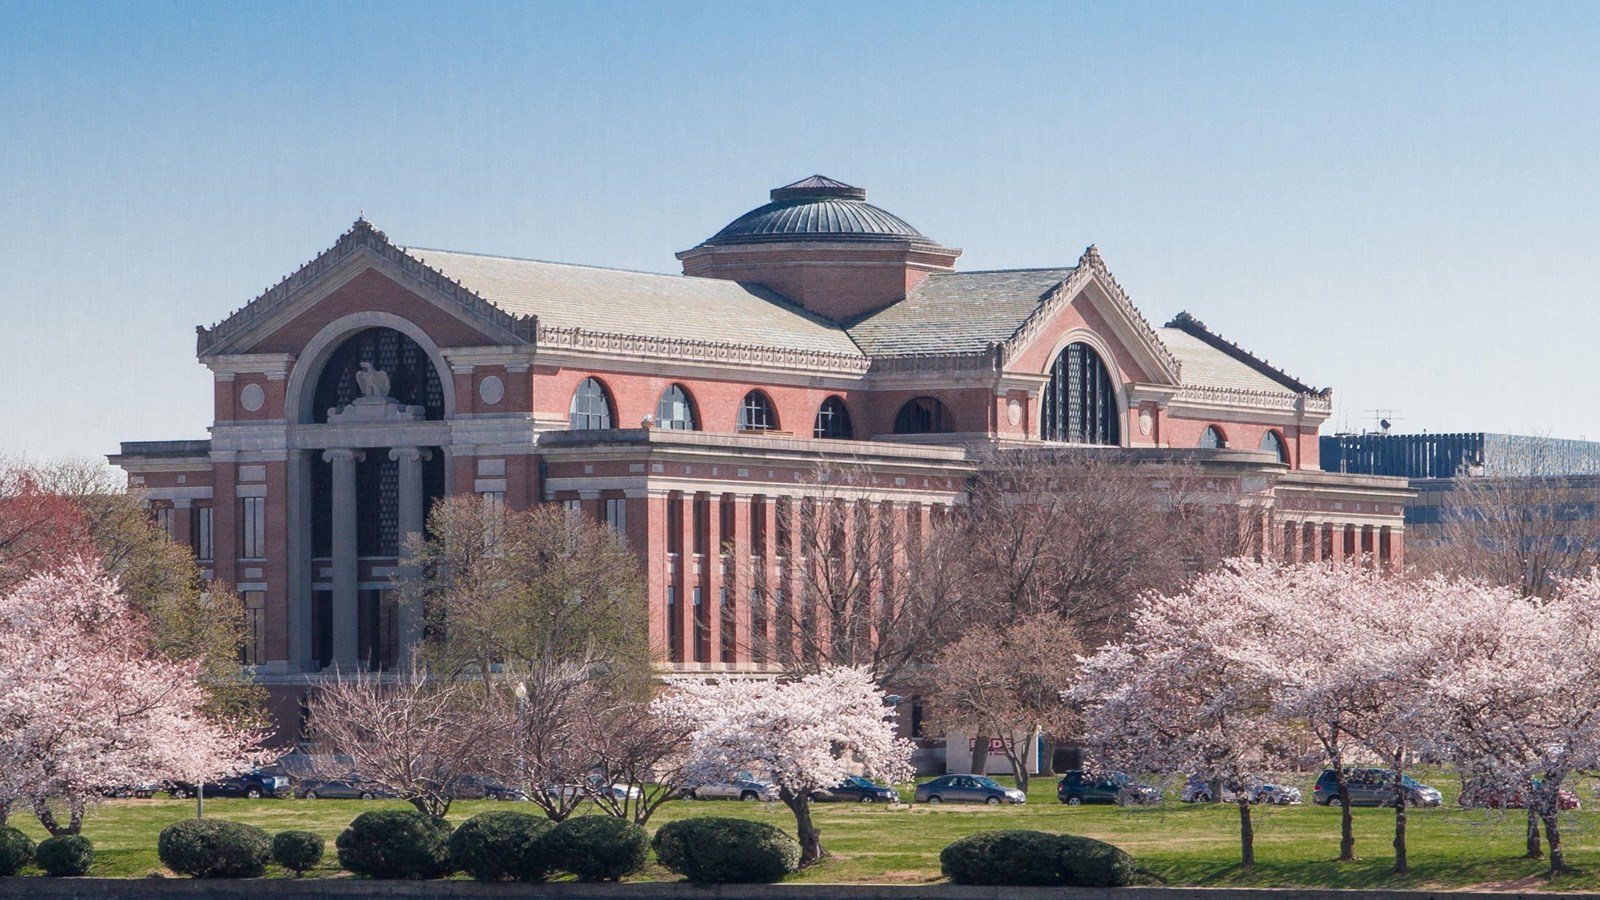 A grand Classical building with archway and central rotunda overlooks a river and cherry blossoms.